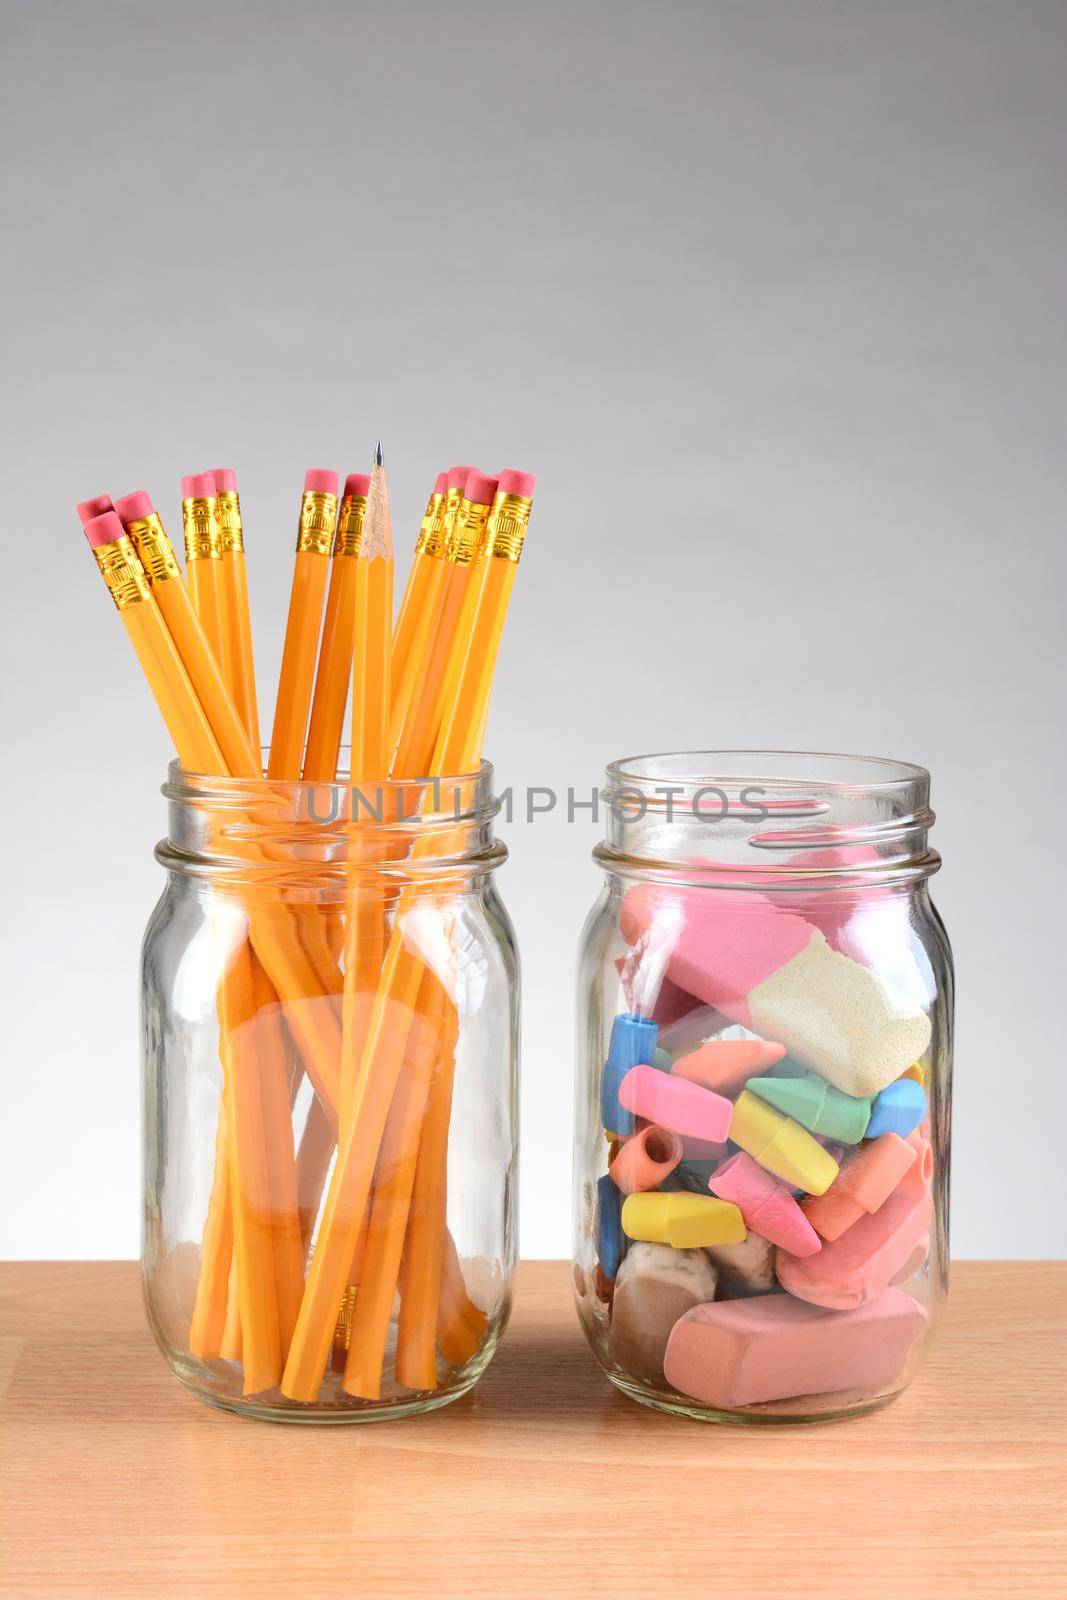 Closeup of two jars on a teachers desk with pencils and erasers. Vertical format on a light to dark gray background with copy space.